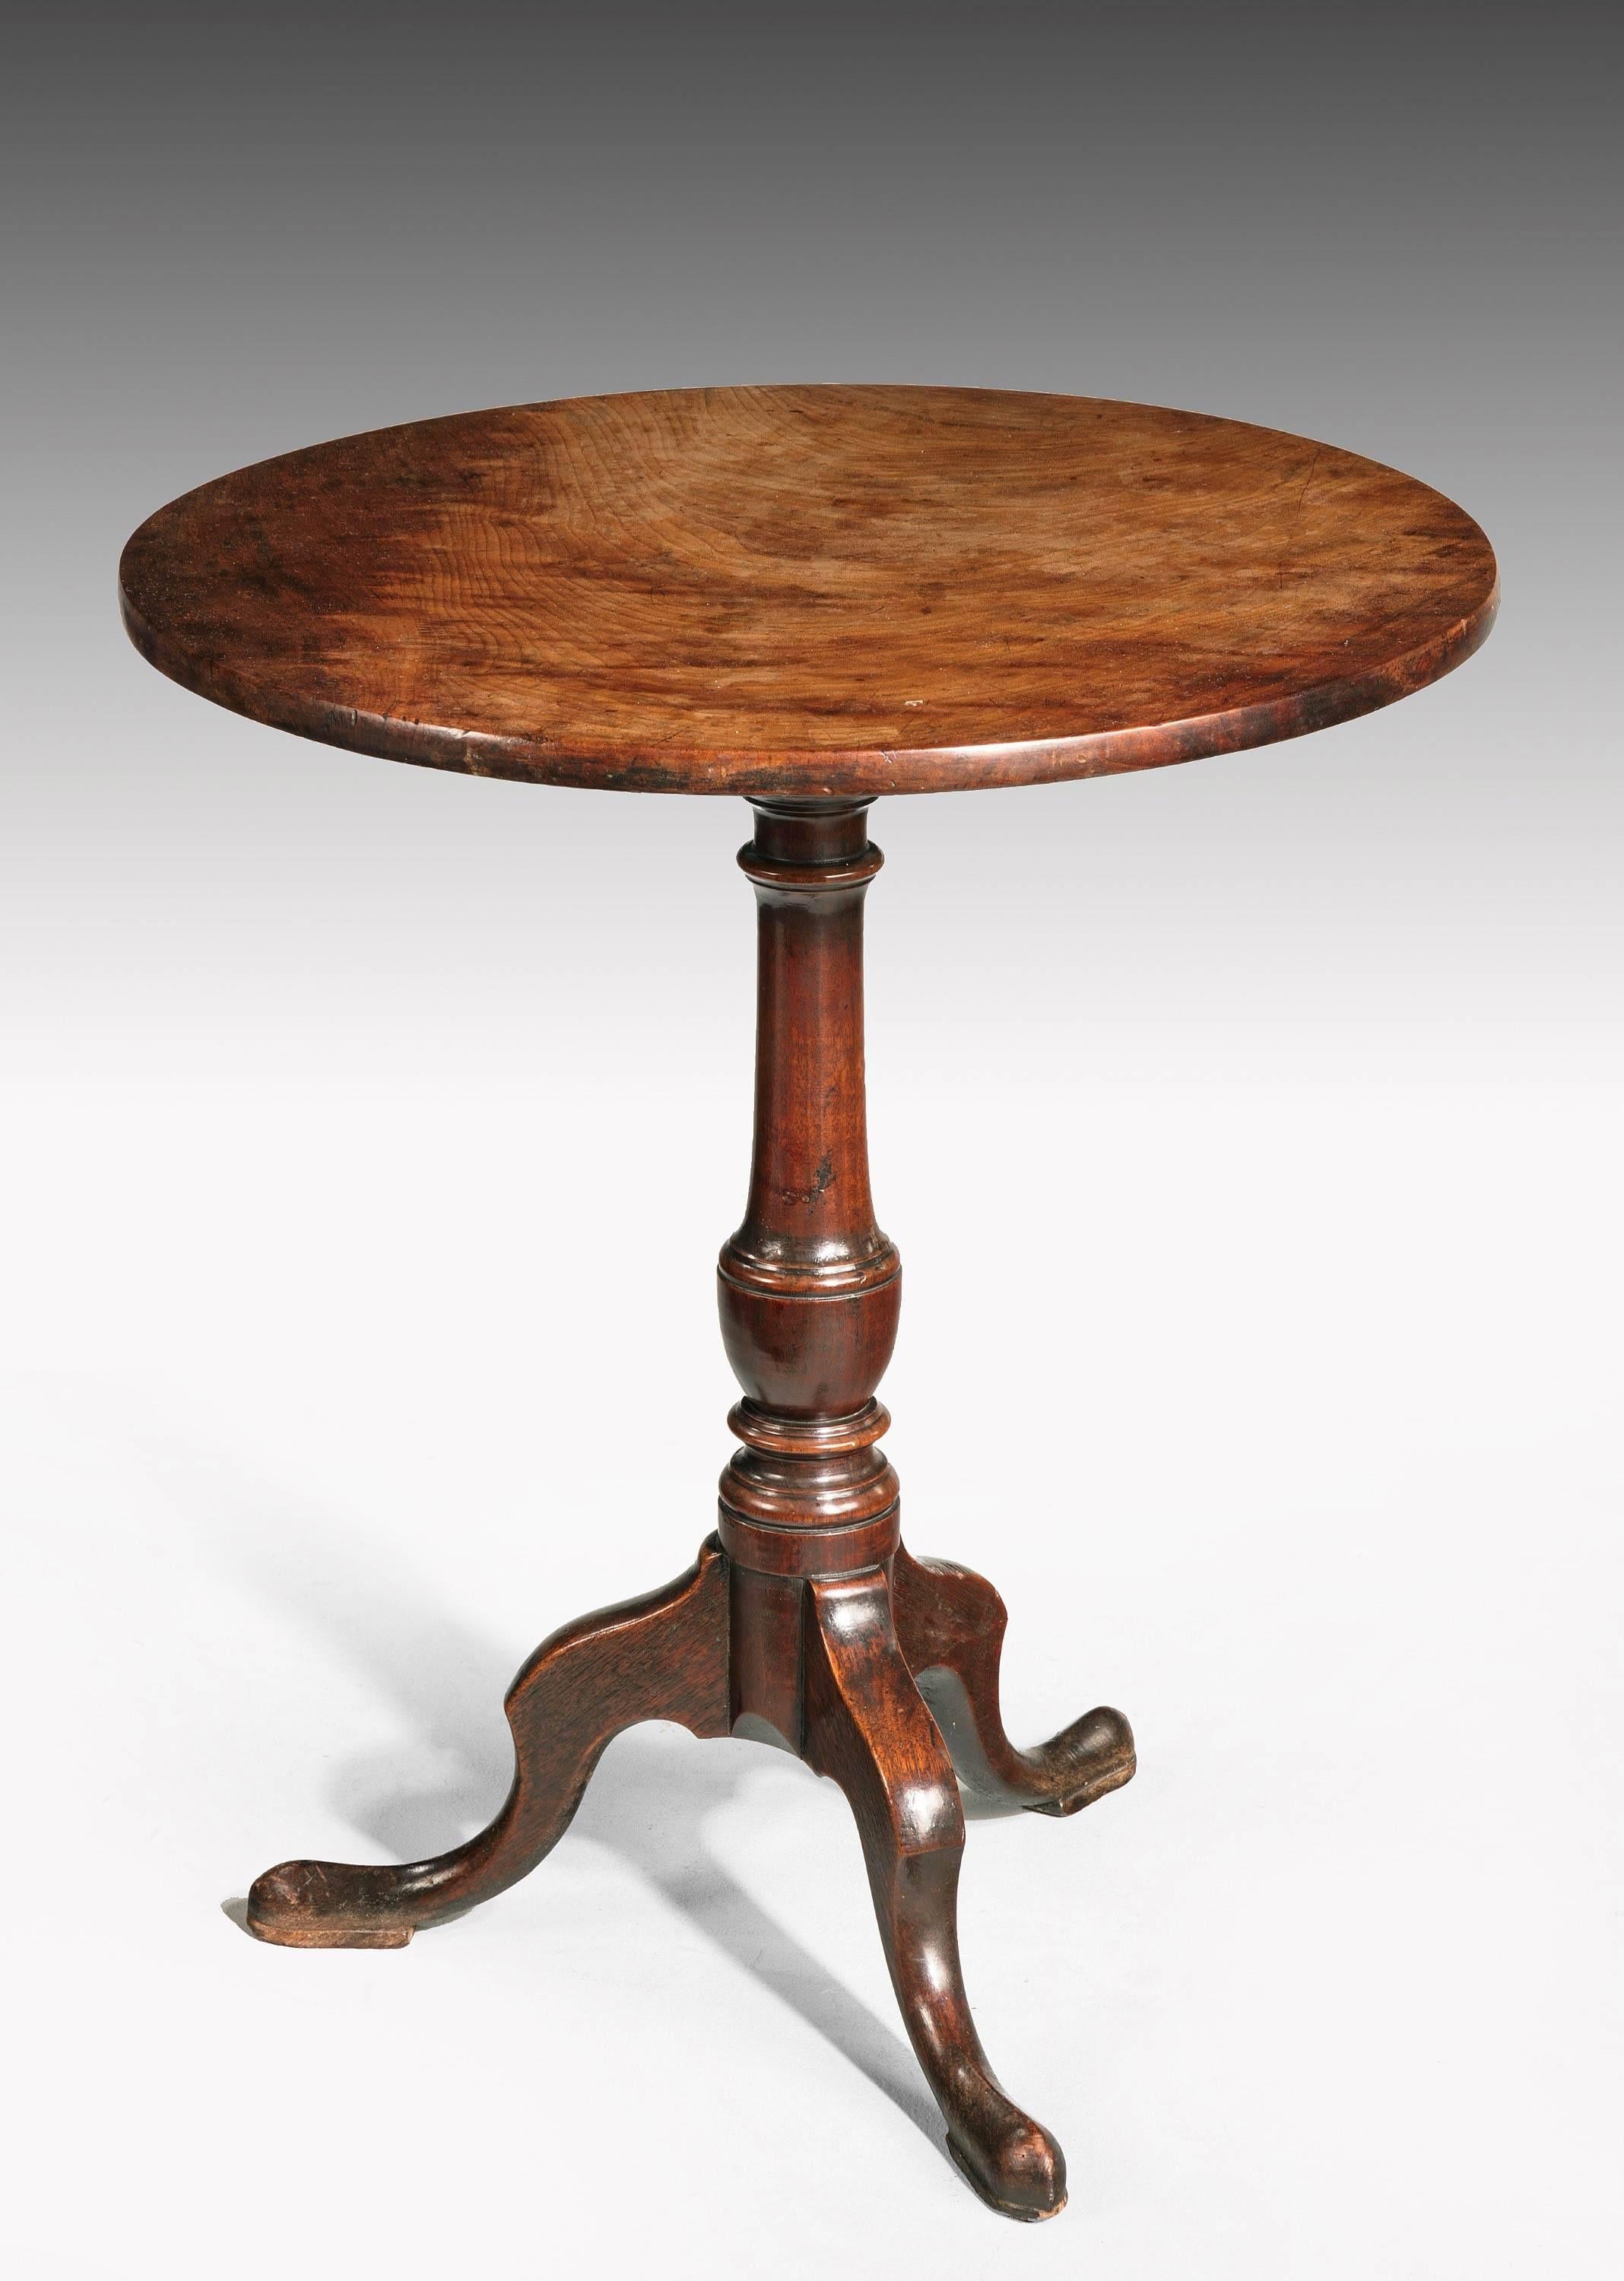 Great Britain (UK) George III Period Mahogany Tilt Table with Original Works to the Underside